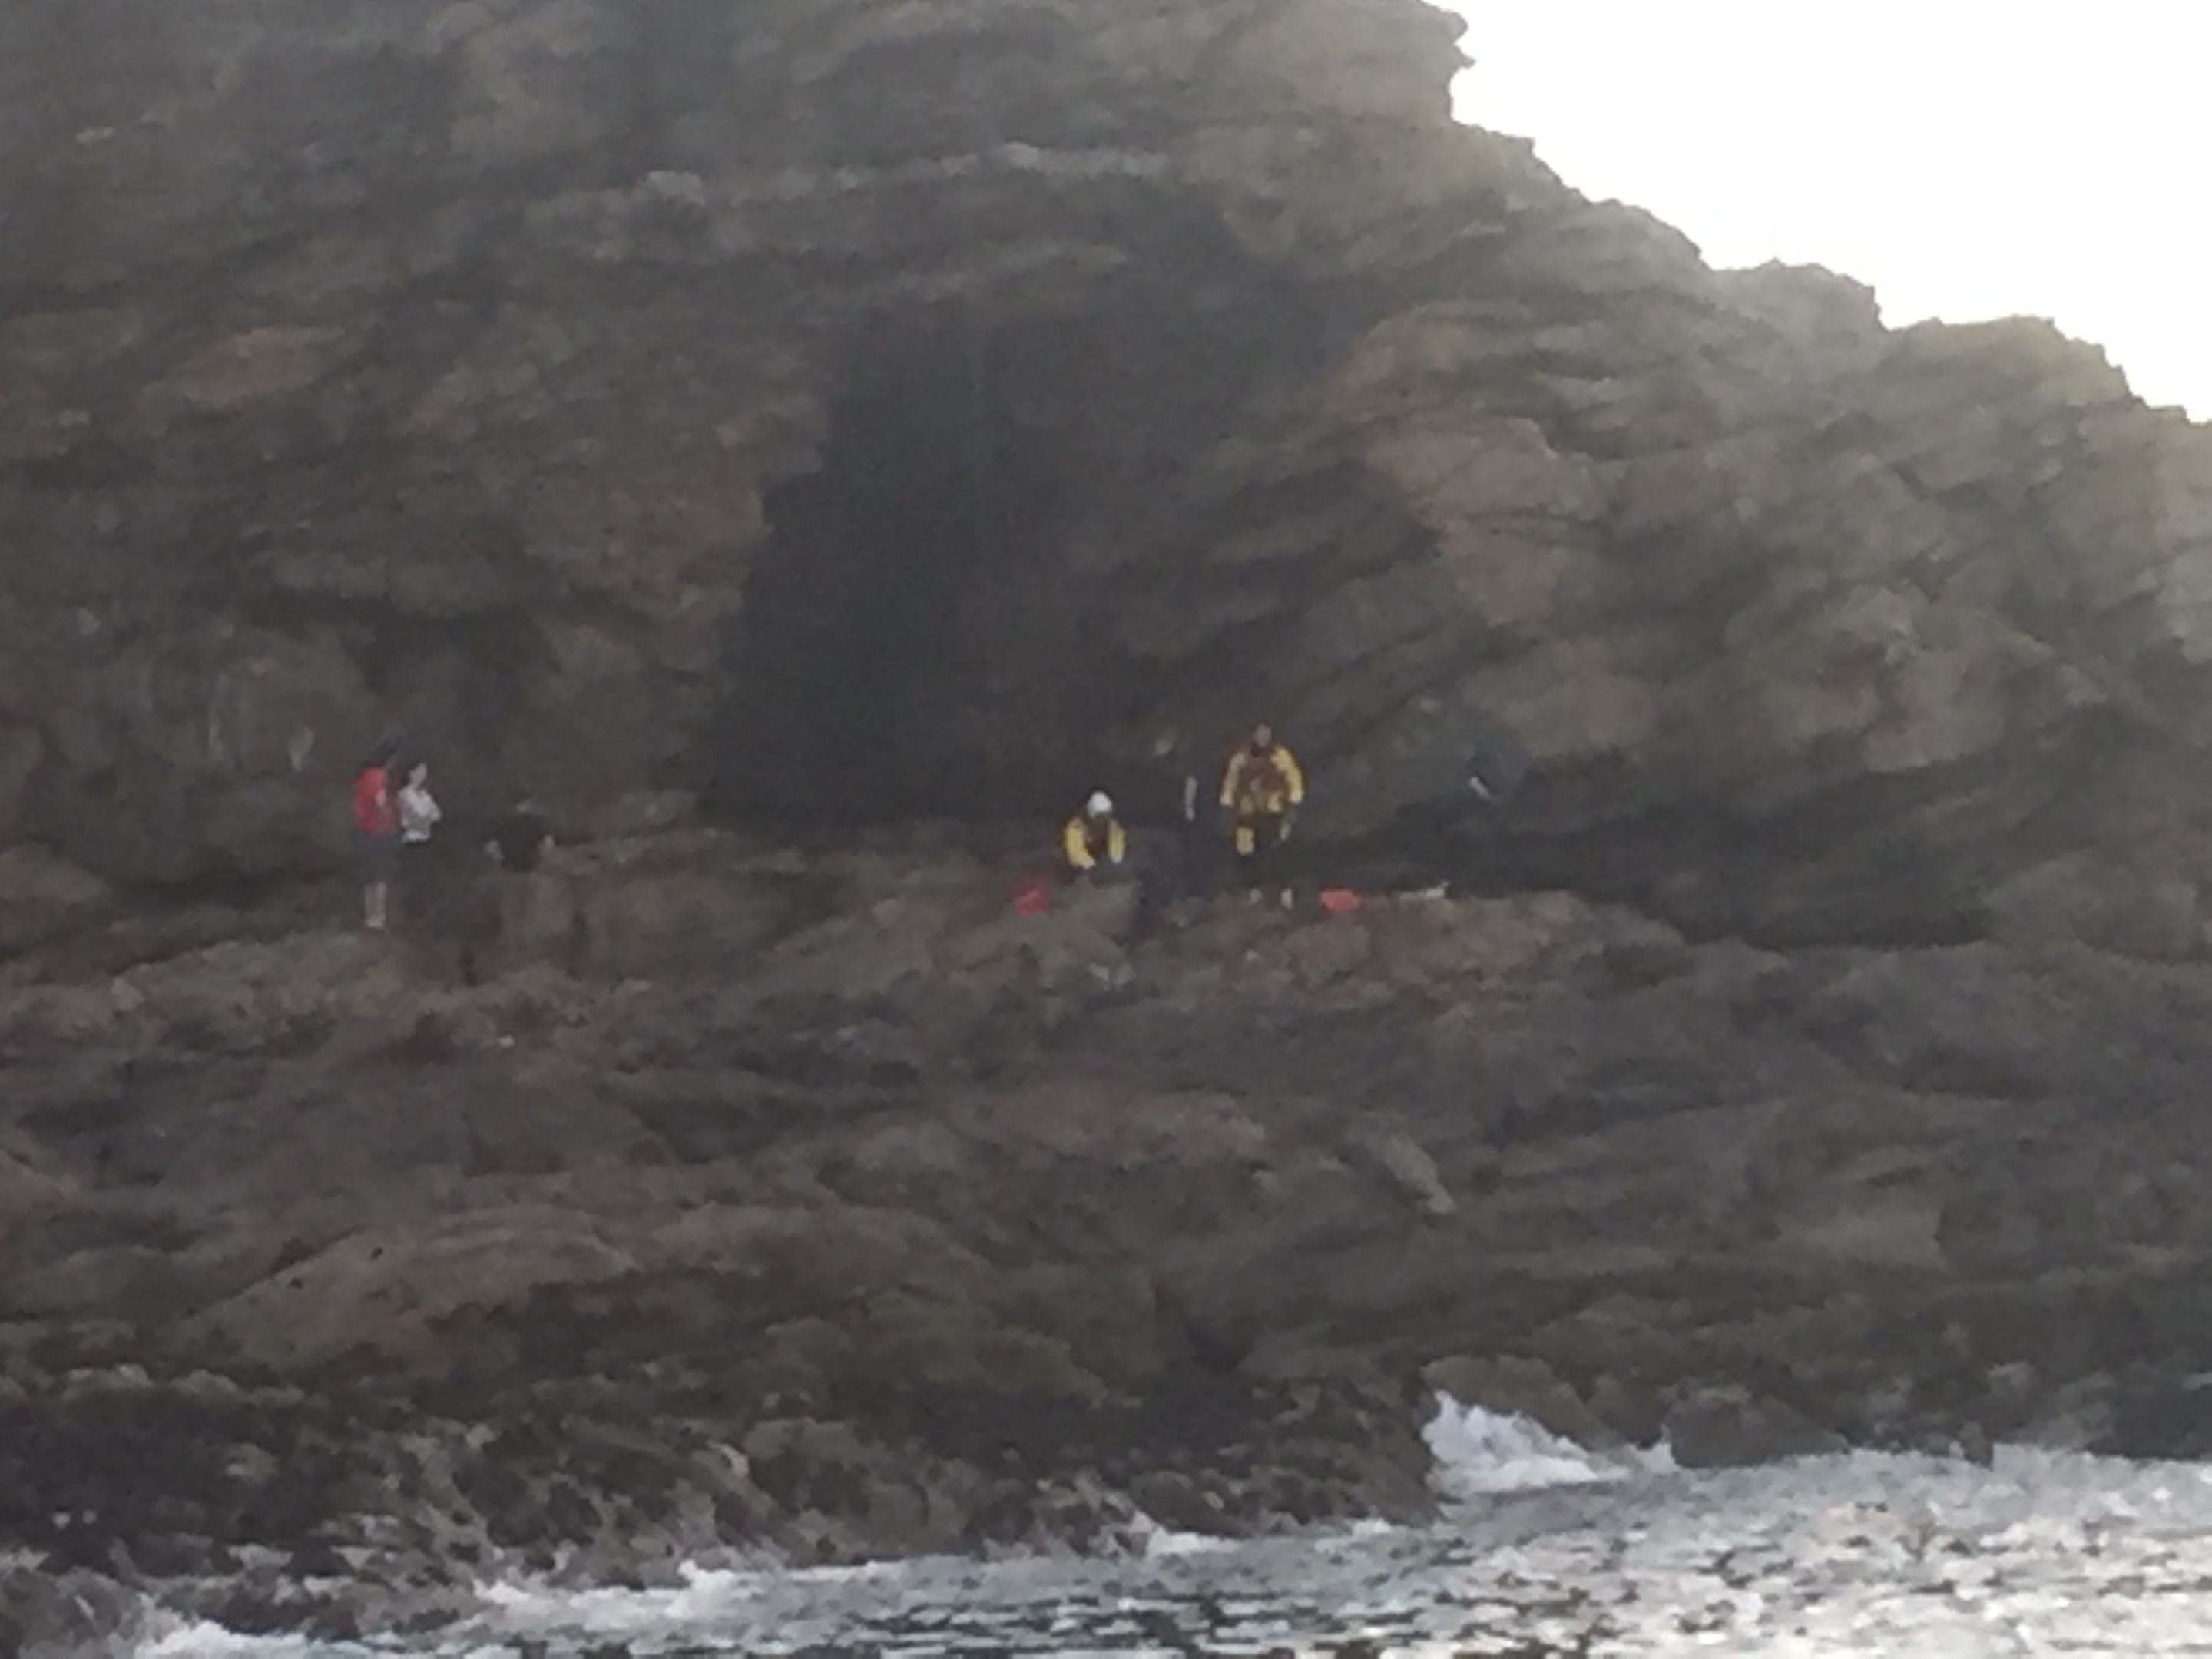 Rescuers at the scene at the Newtonhill cliffs